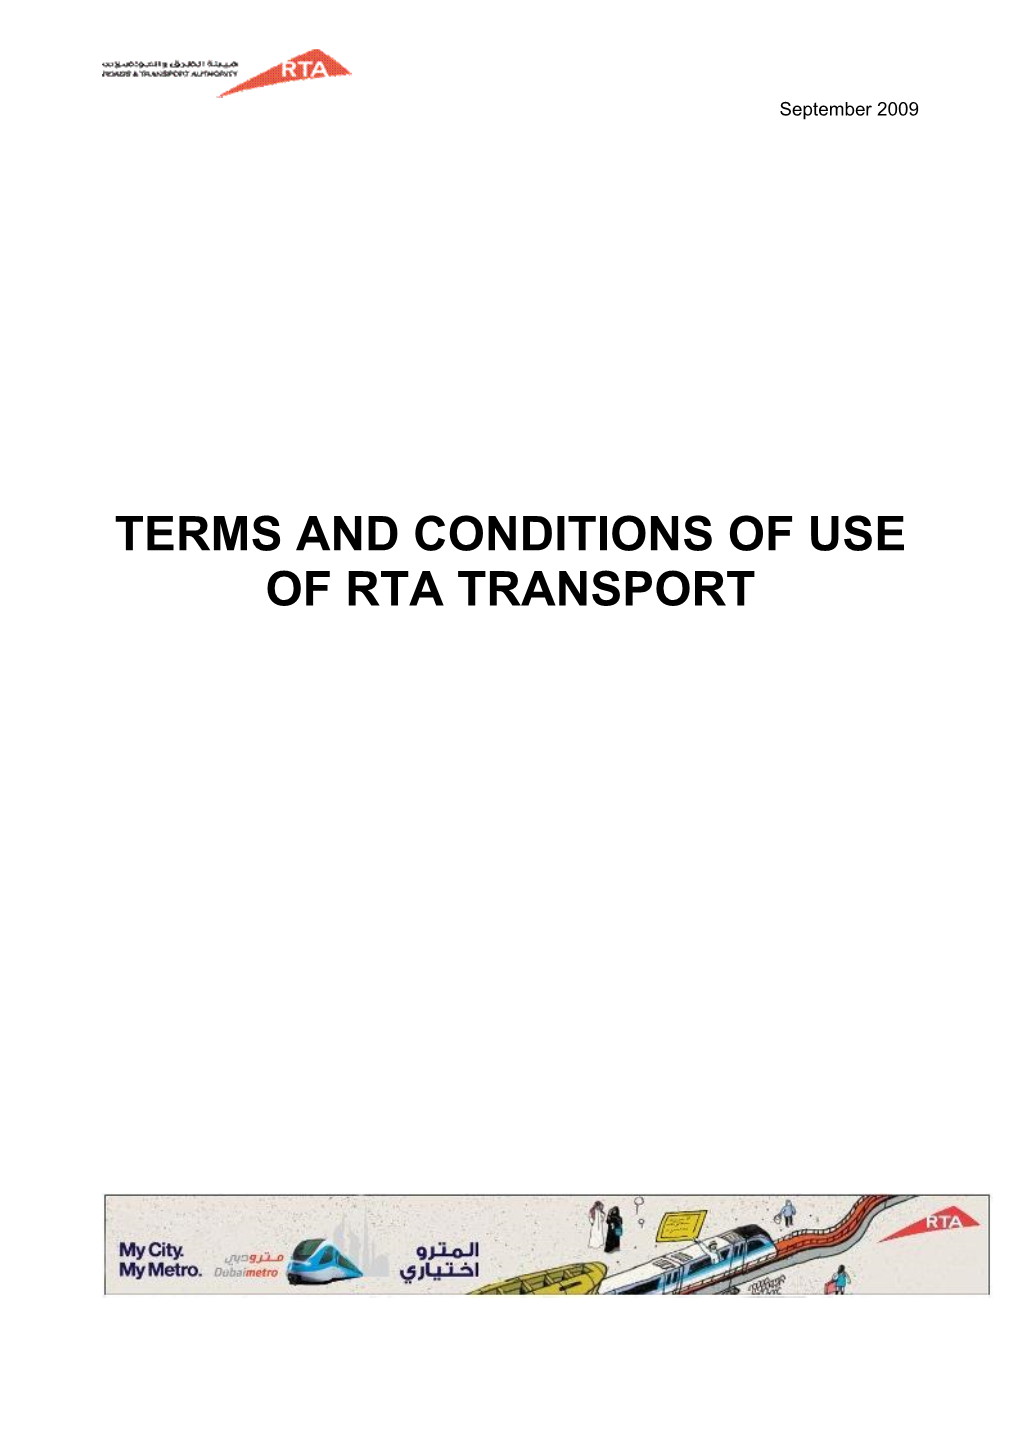 Terms and Conditions of Use of Rta Transport